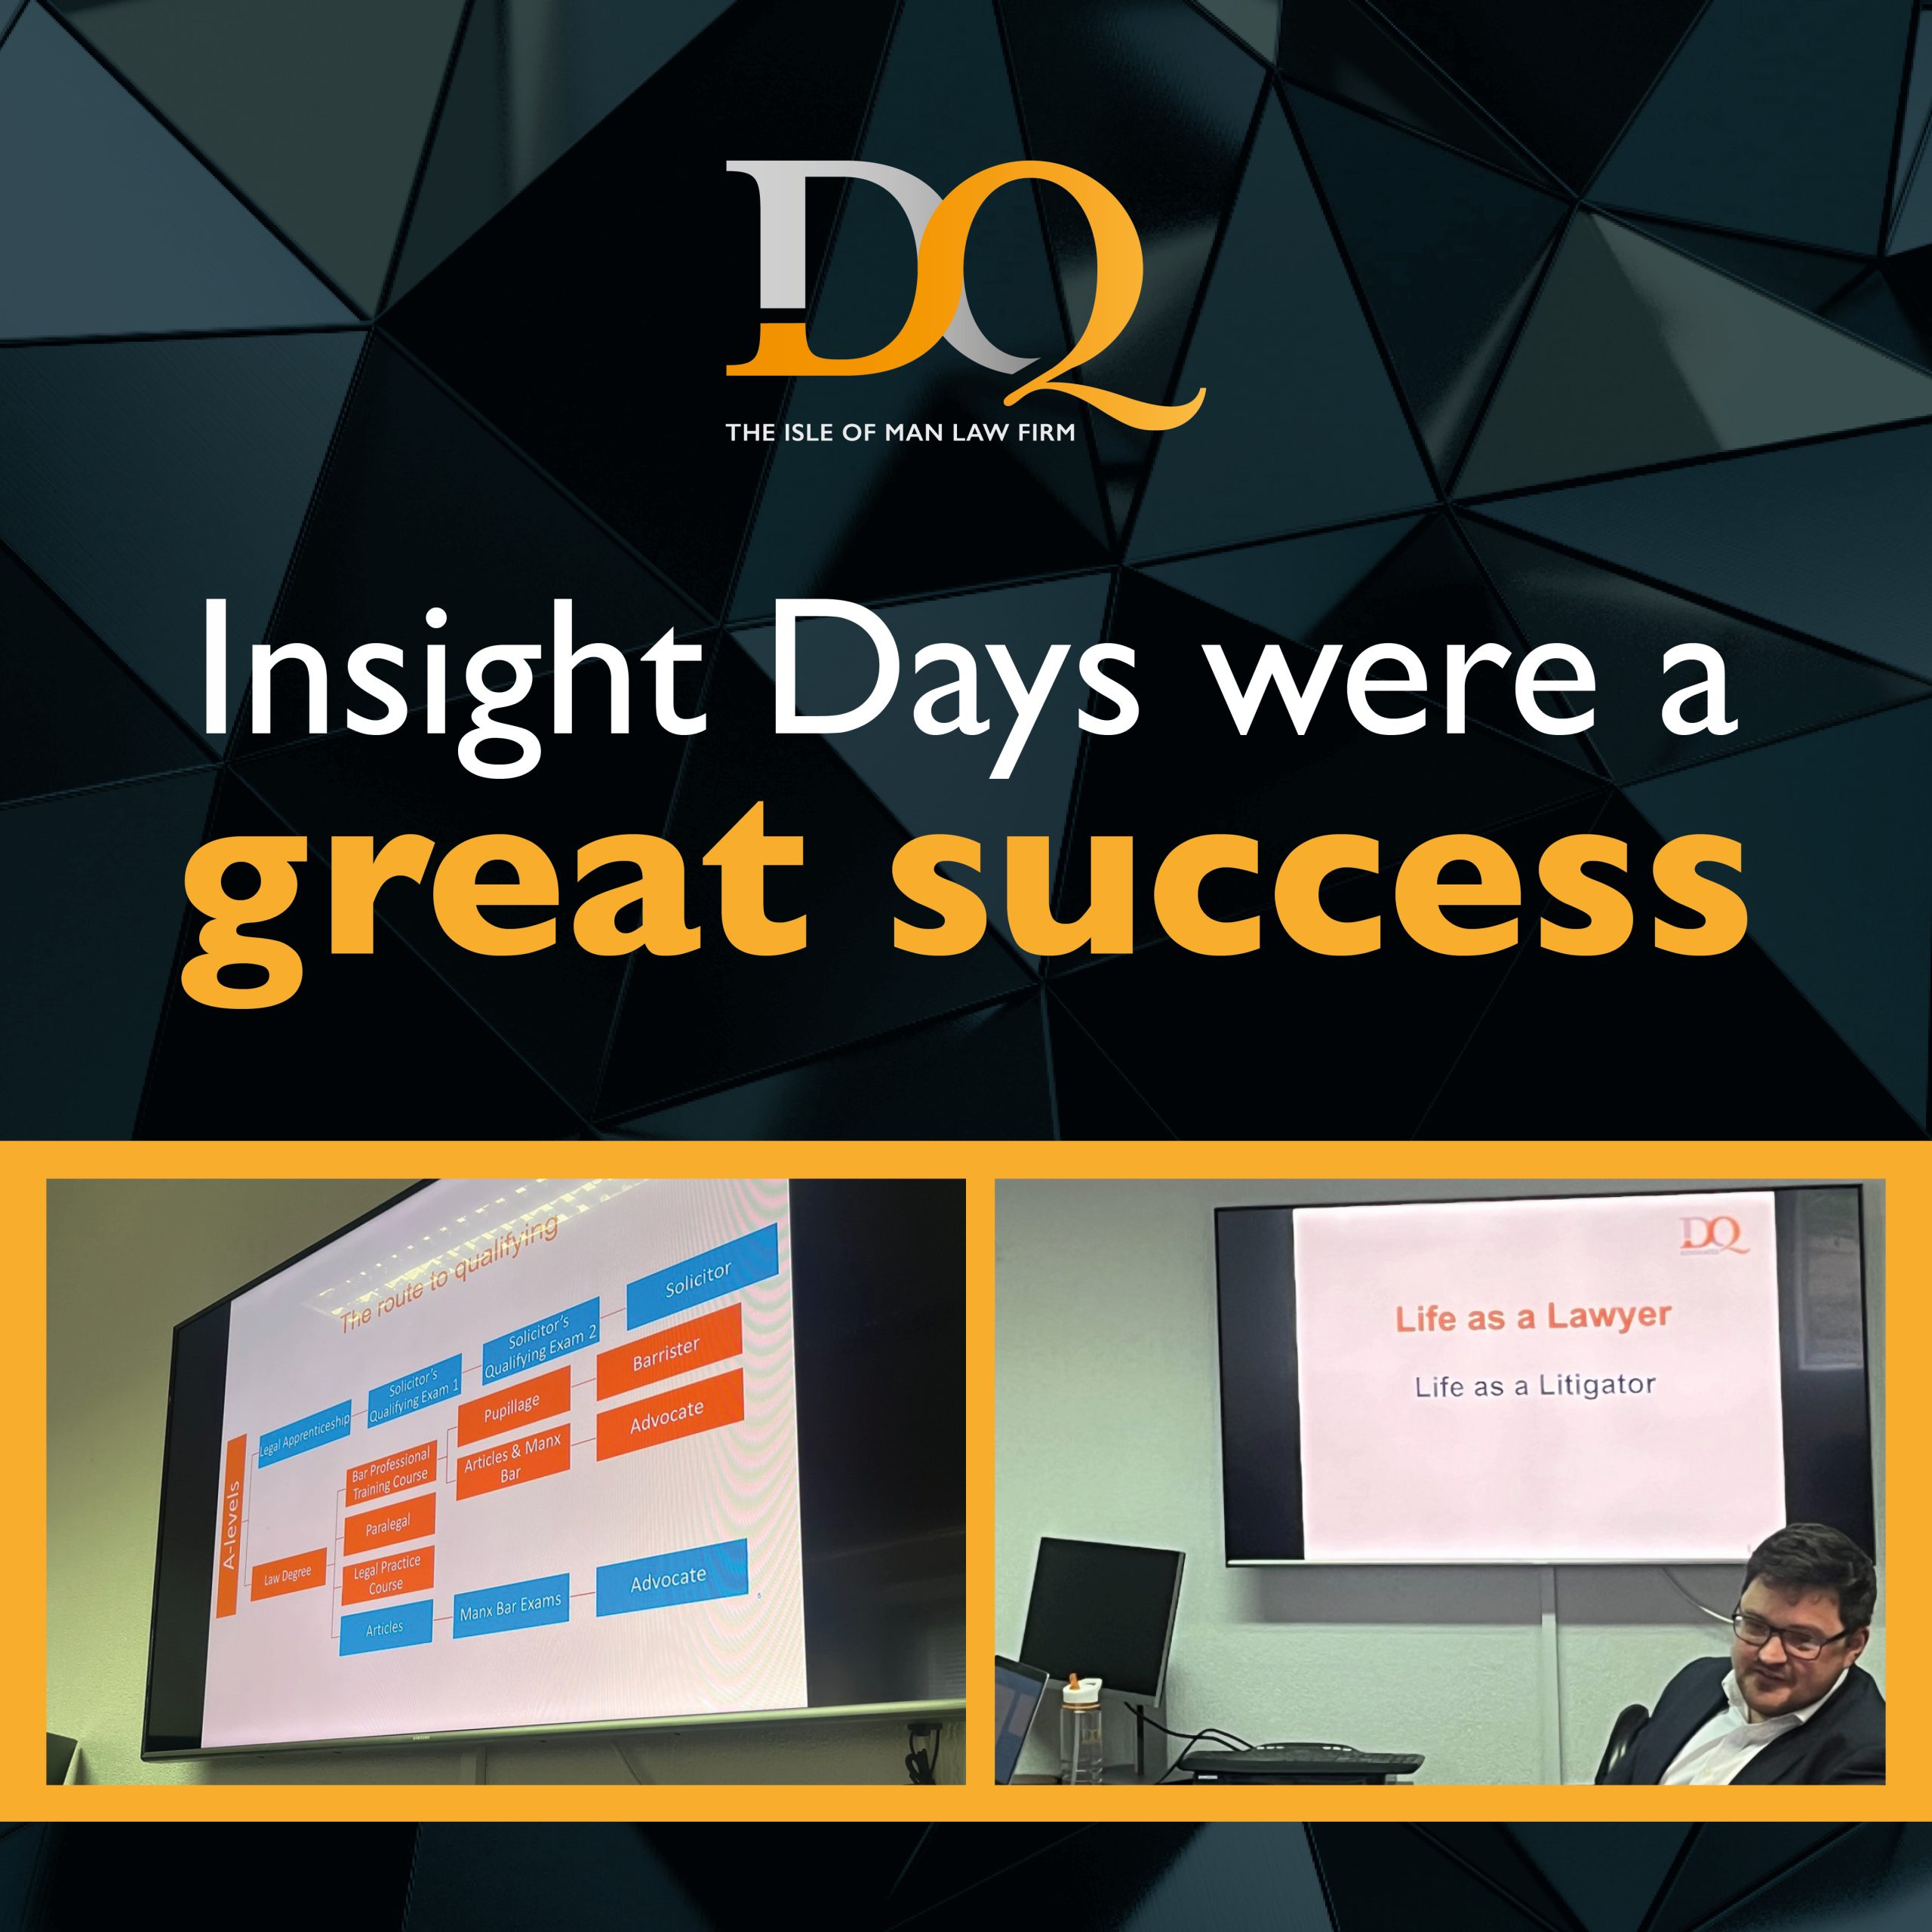 DQ Hosts Successful Insight Day, Inspiring Future Legal Professionals